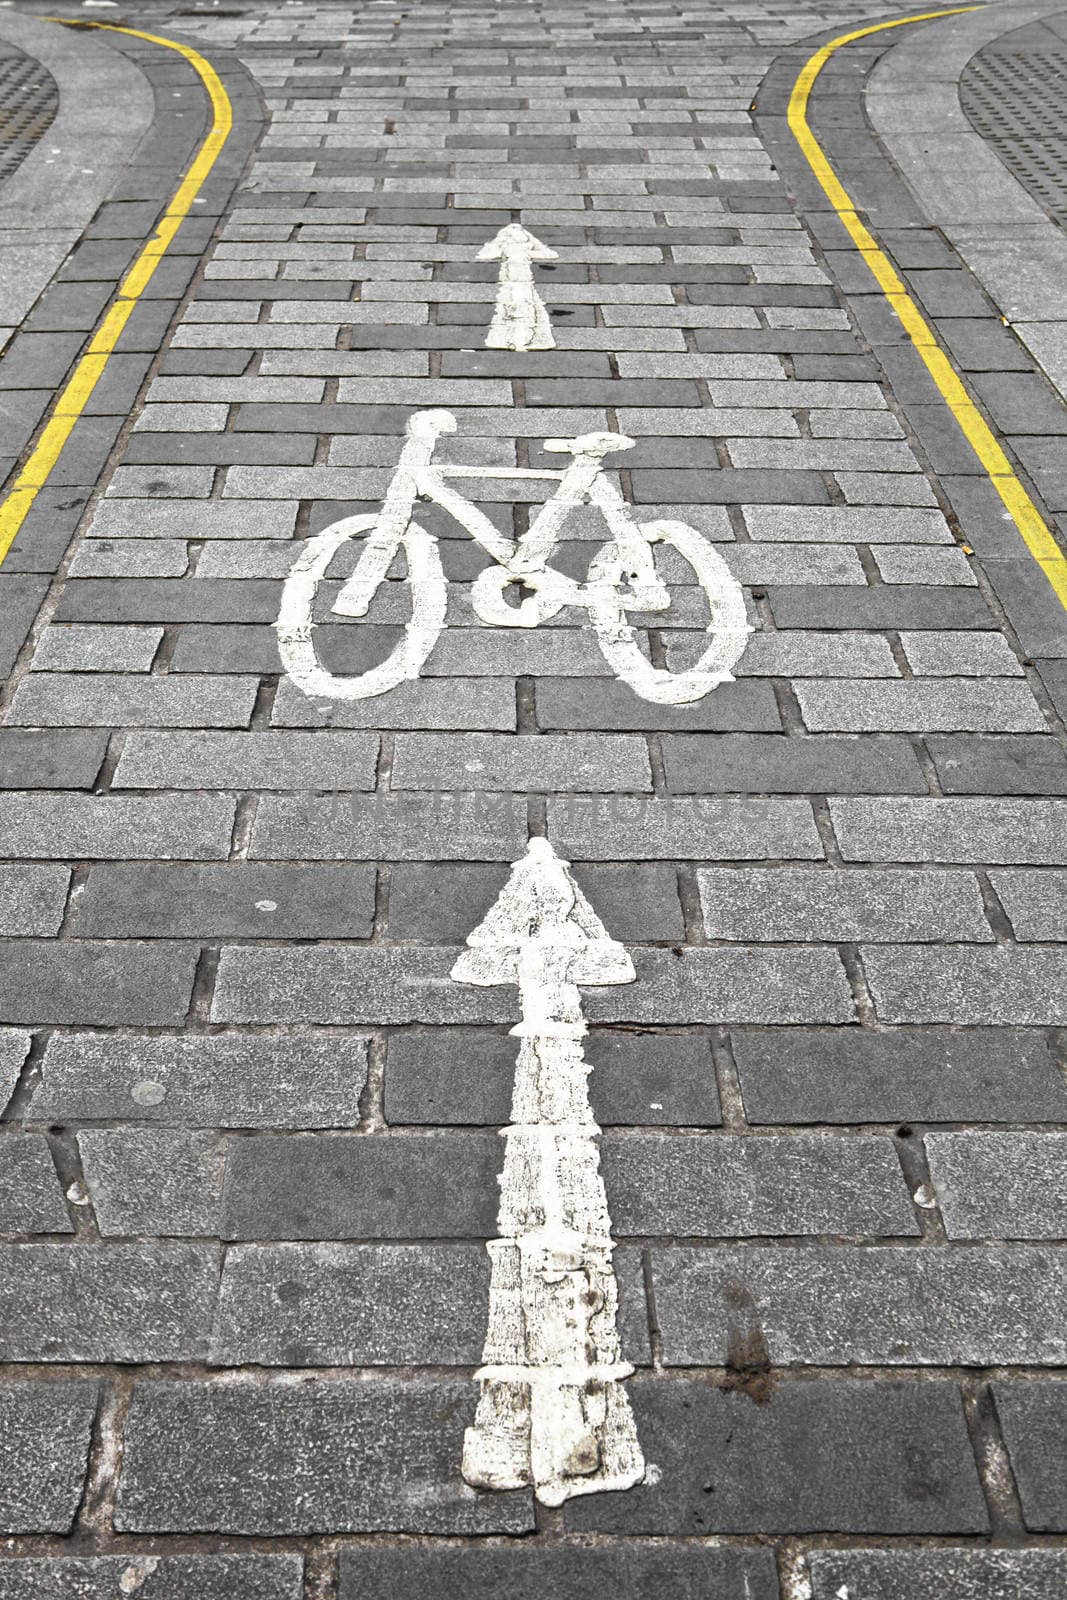 Cycle path in a city with yellow lines